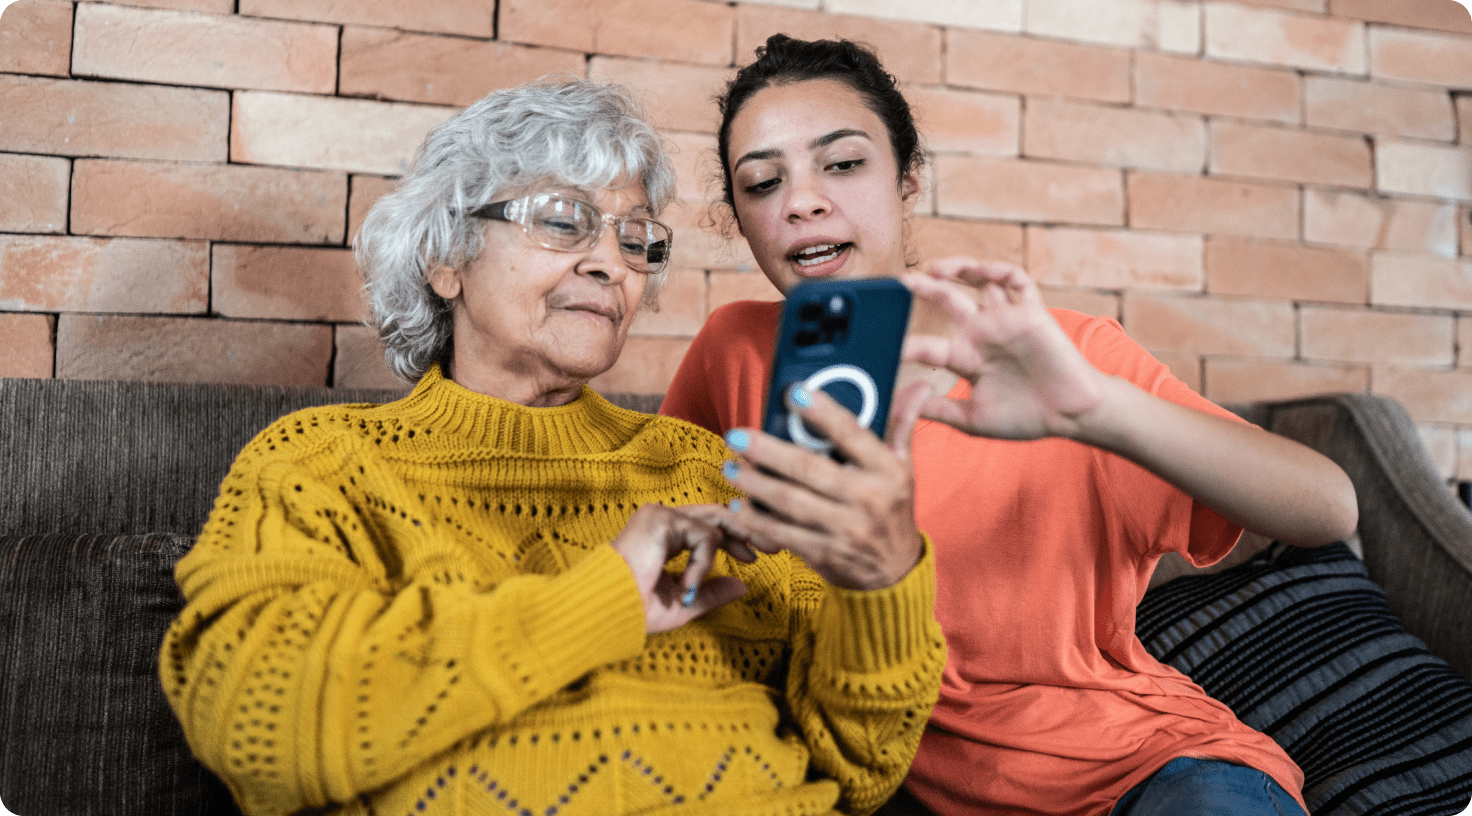 A younger woman and older woman viewing a smartphone together